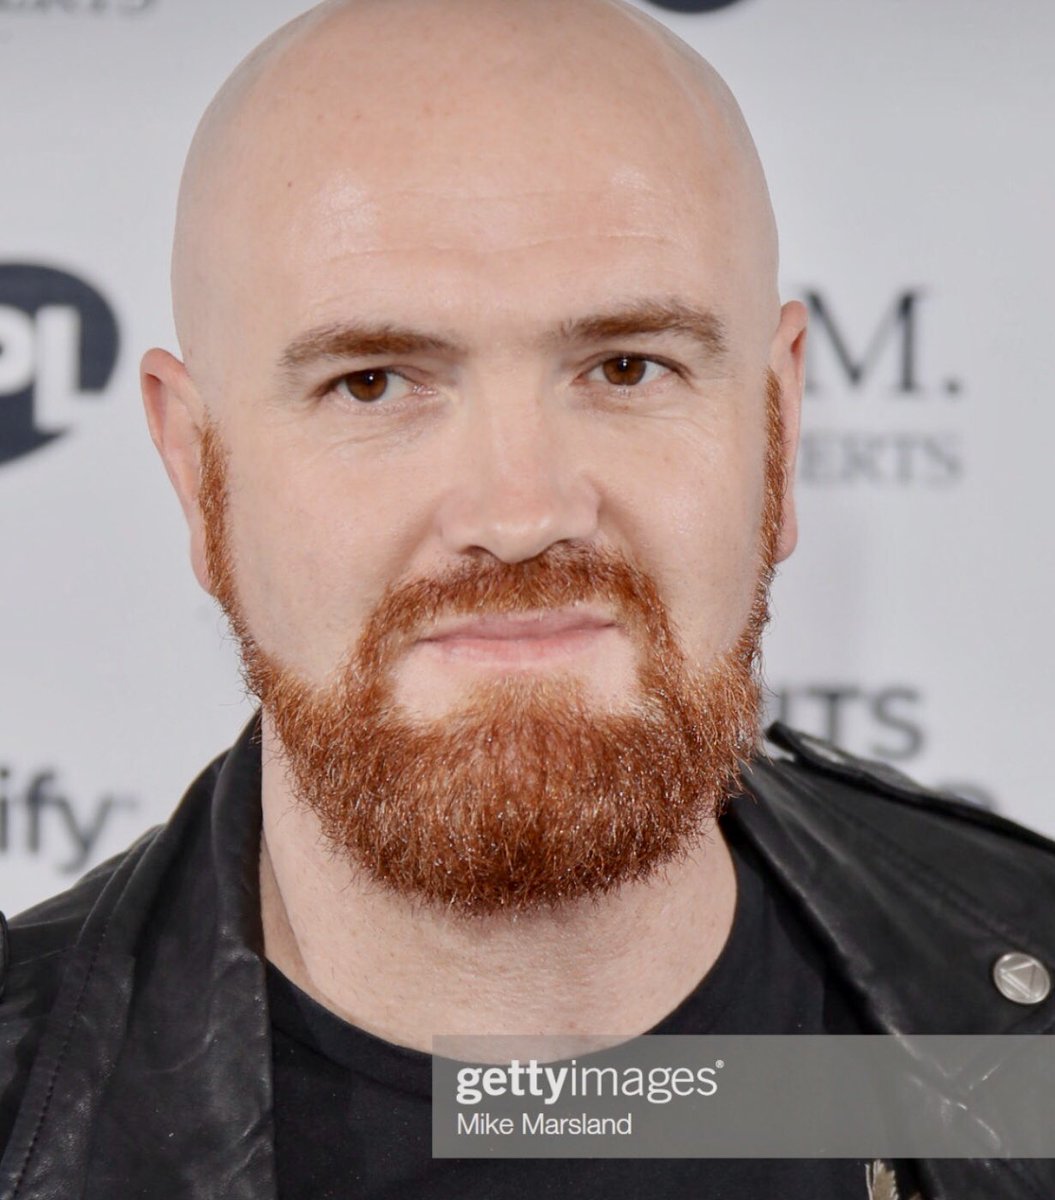 Miss you M 🥺💔 
#MarkSheehan Forever in our hearts 🫶🏻🤍
✨💫🌟🎸 🕊️ 
#ArmsOpen #Always